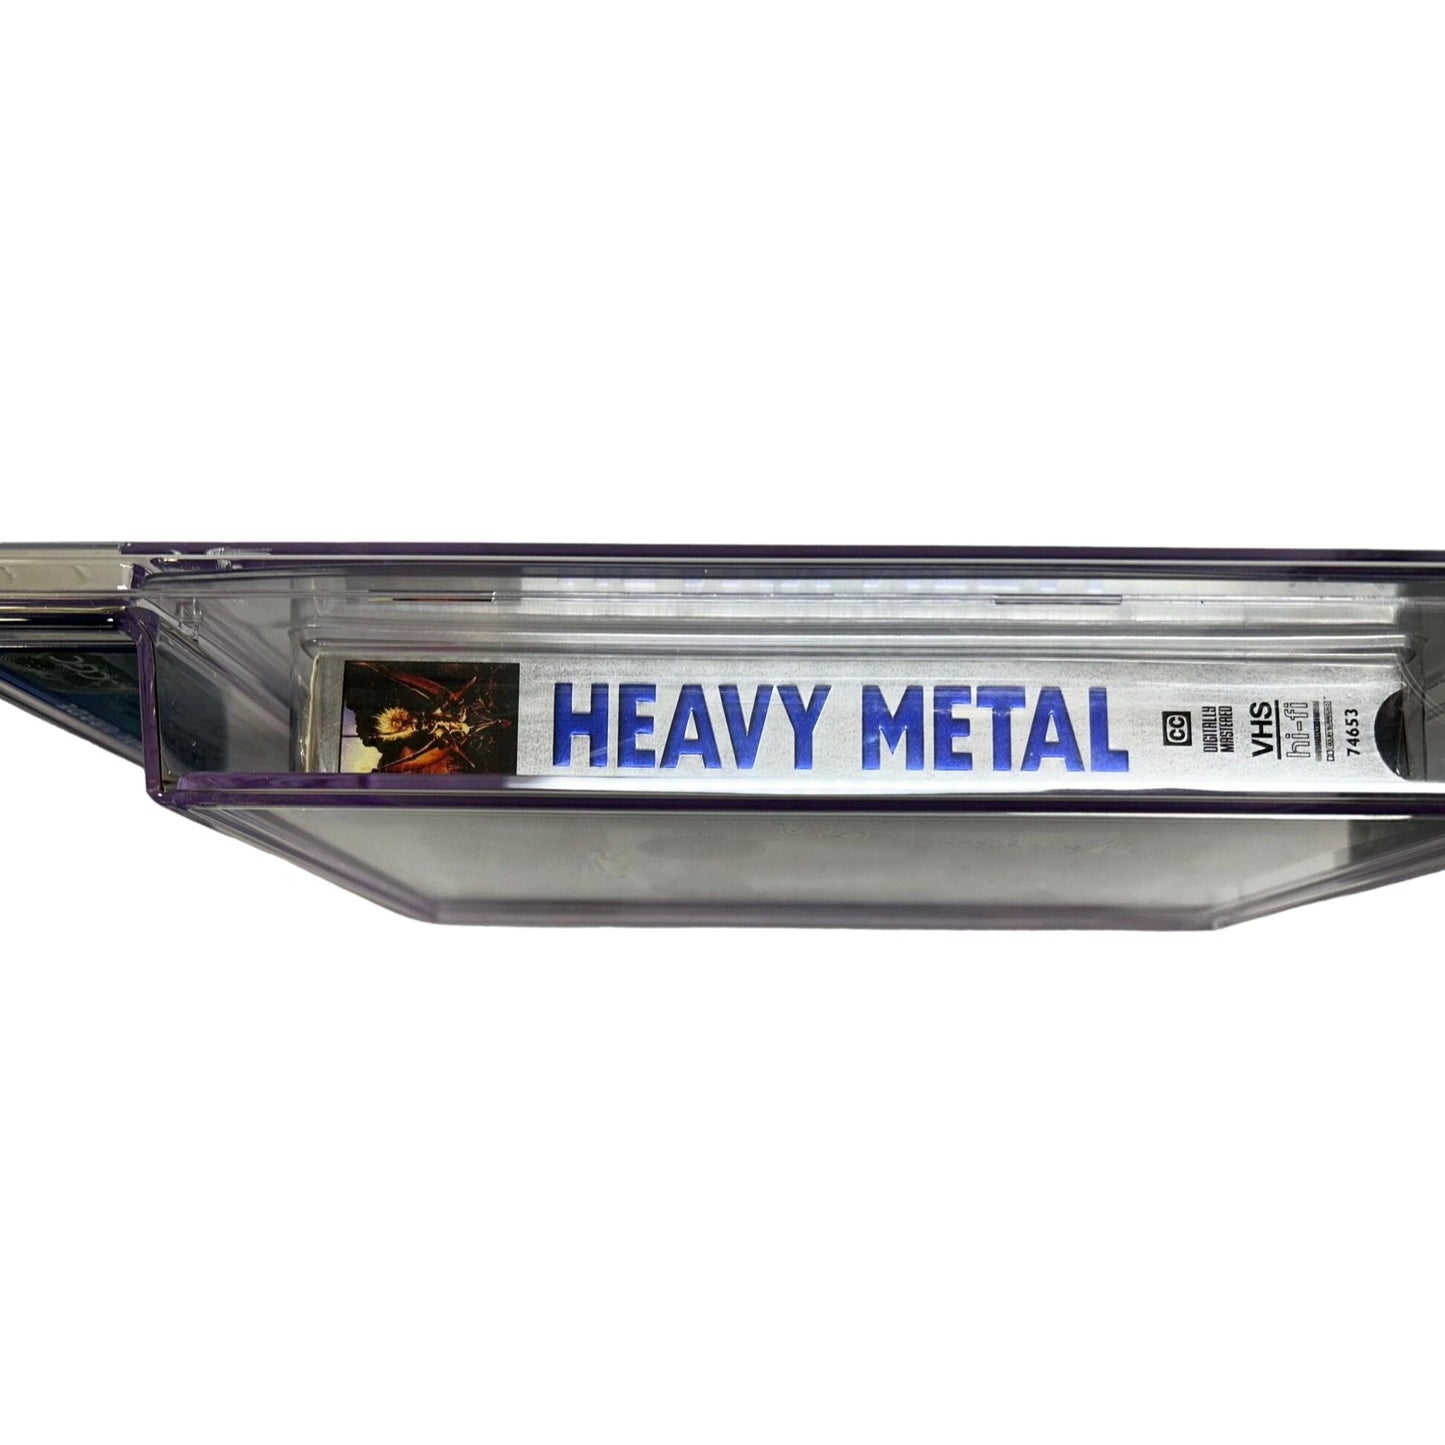 Heavy Metal VHS CGC Graded 9.4 Sealed A++